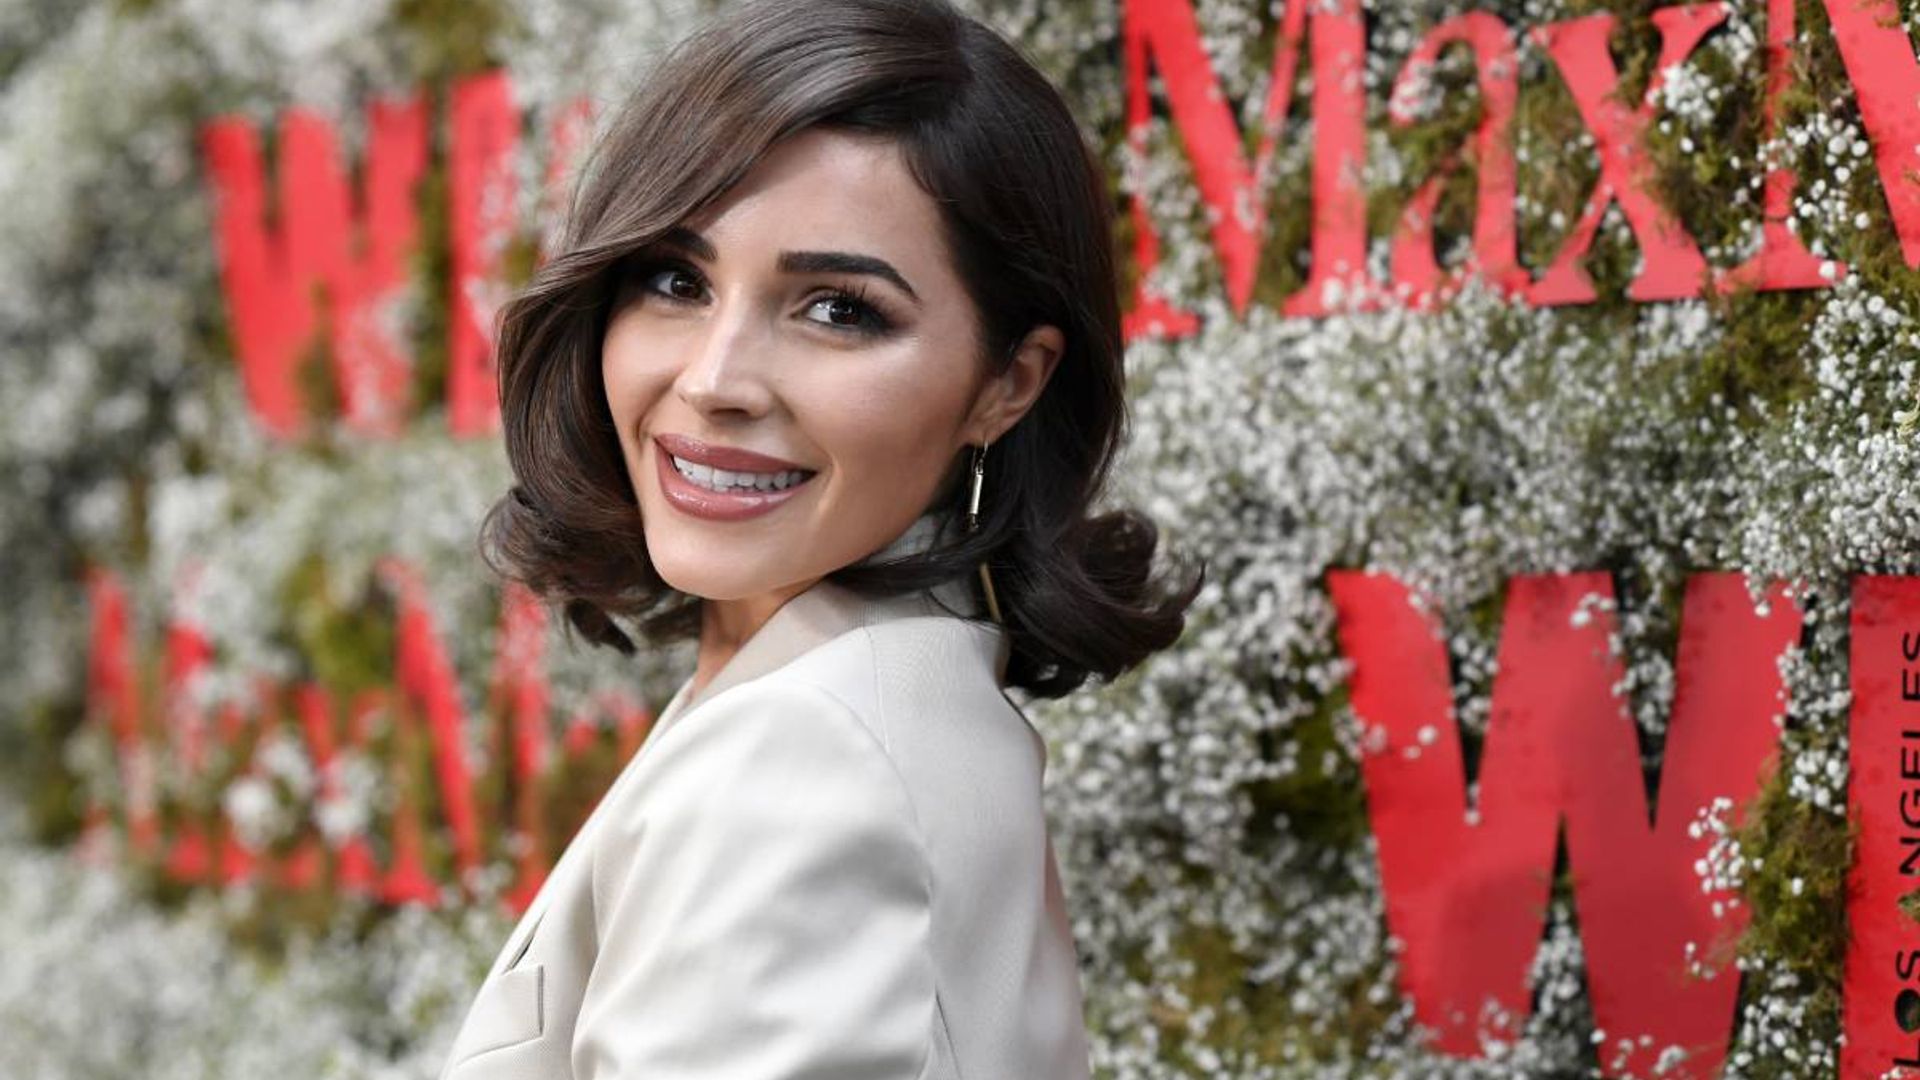 Olivia Culpo’s secret talent will make your mouth water